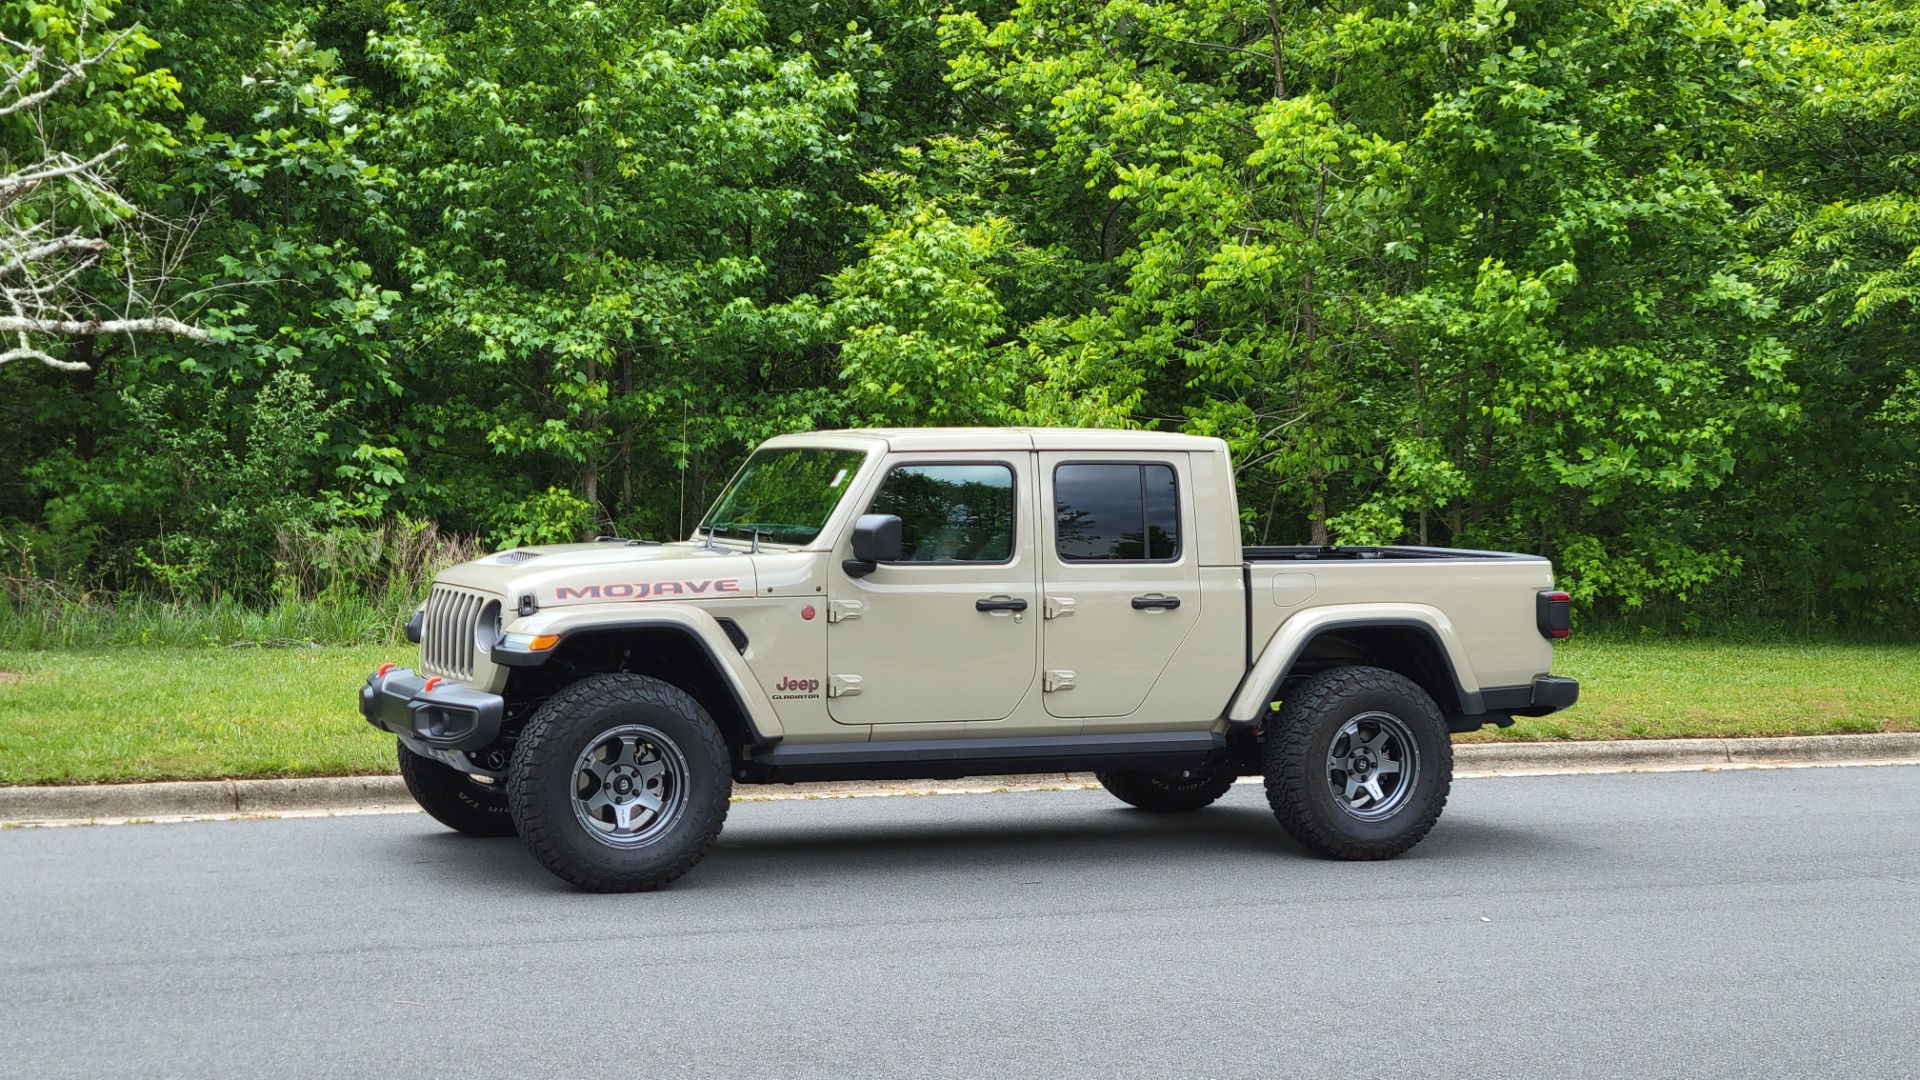 Used 2020 Jeep GLADIATOR MOJAVE 4X4 / 3.6L / AUTO / NAV / COLOR HARD-TOP / ALPINE / REARVIEW for sale $58,995 at Formula Imports in Charlotte NC 28227 105